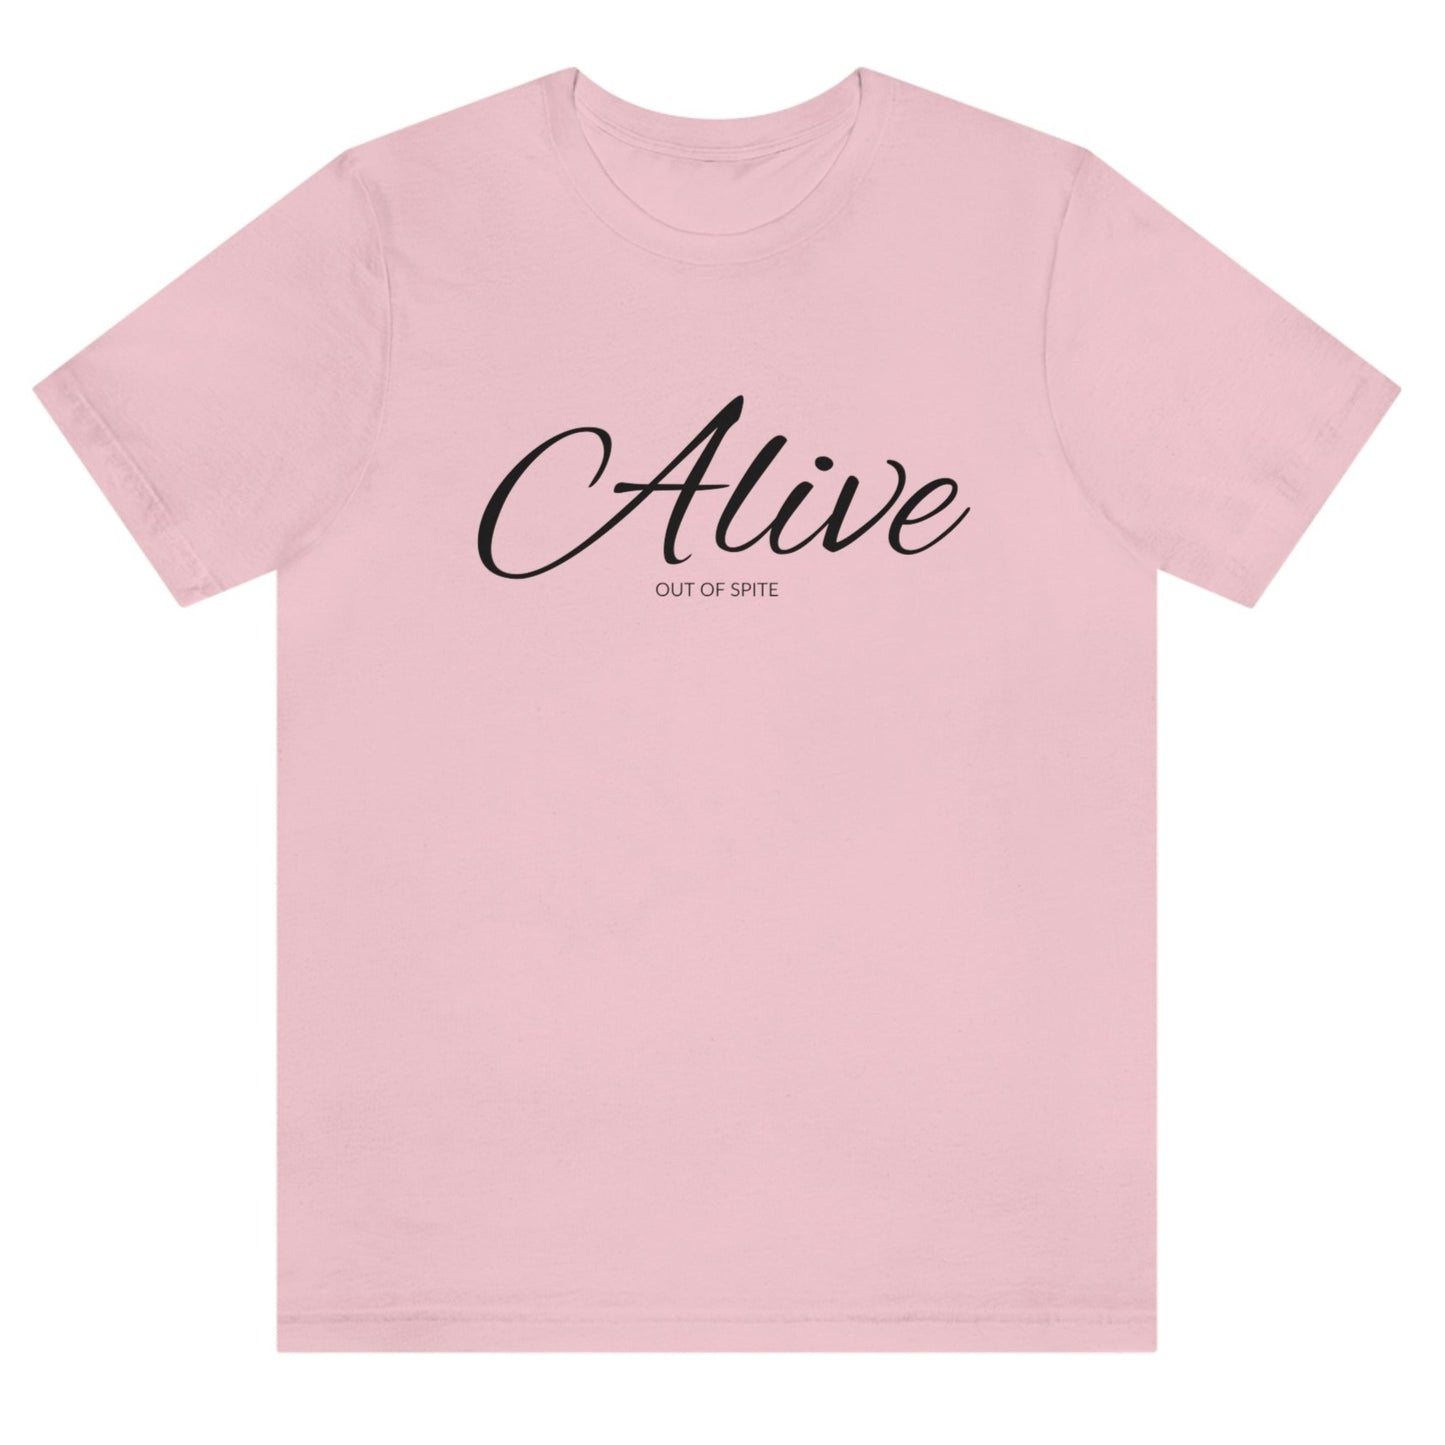 alive-out-of-spite-pink-t-shirt-funny